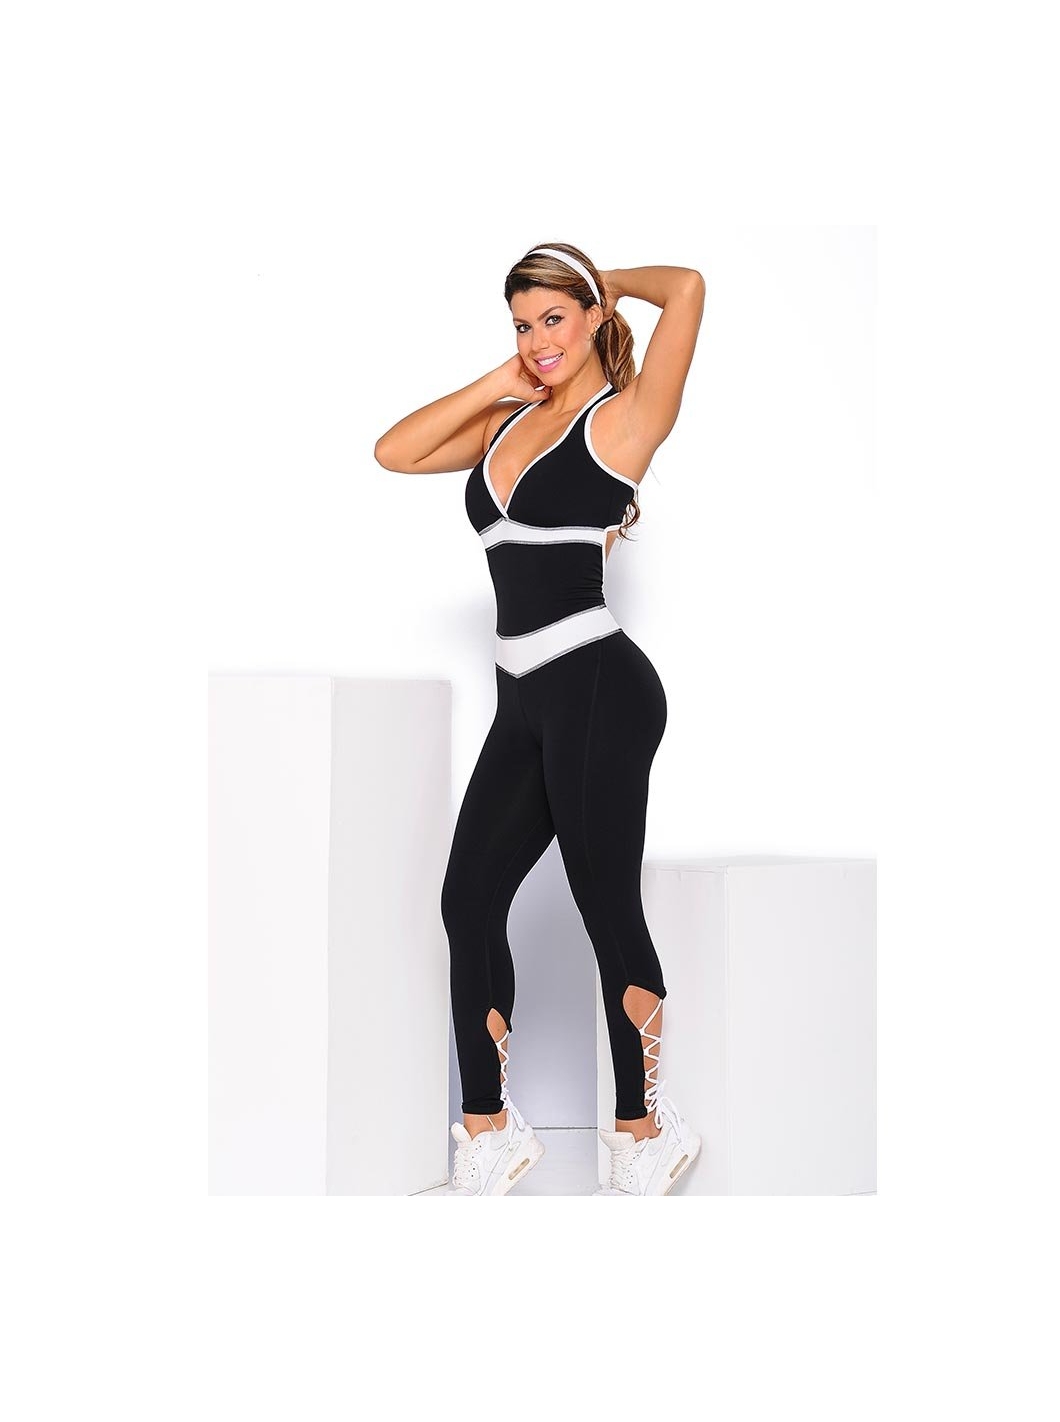 Women's Athletic Jumpsuits - Sports Fashion - Store